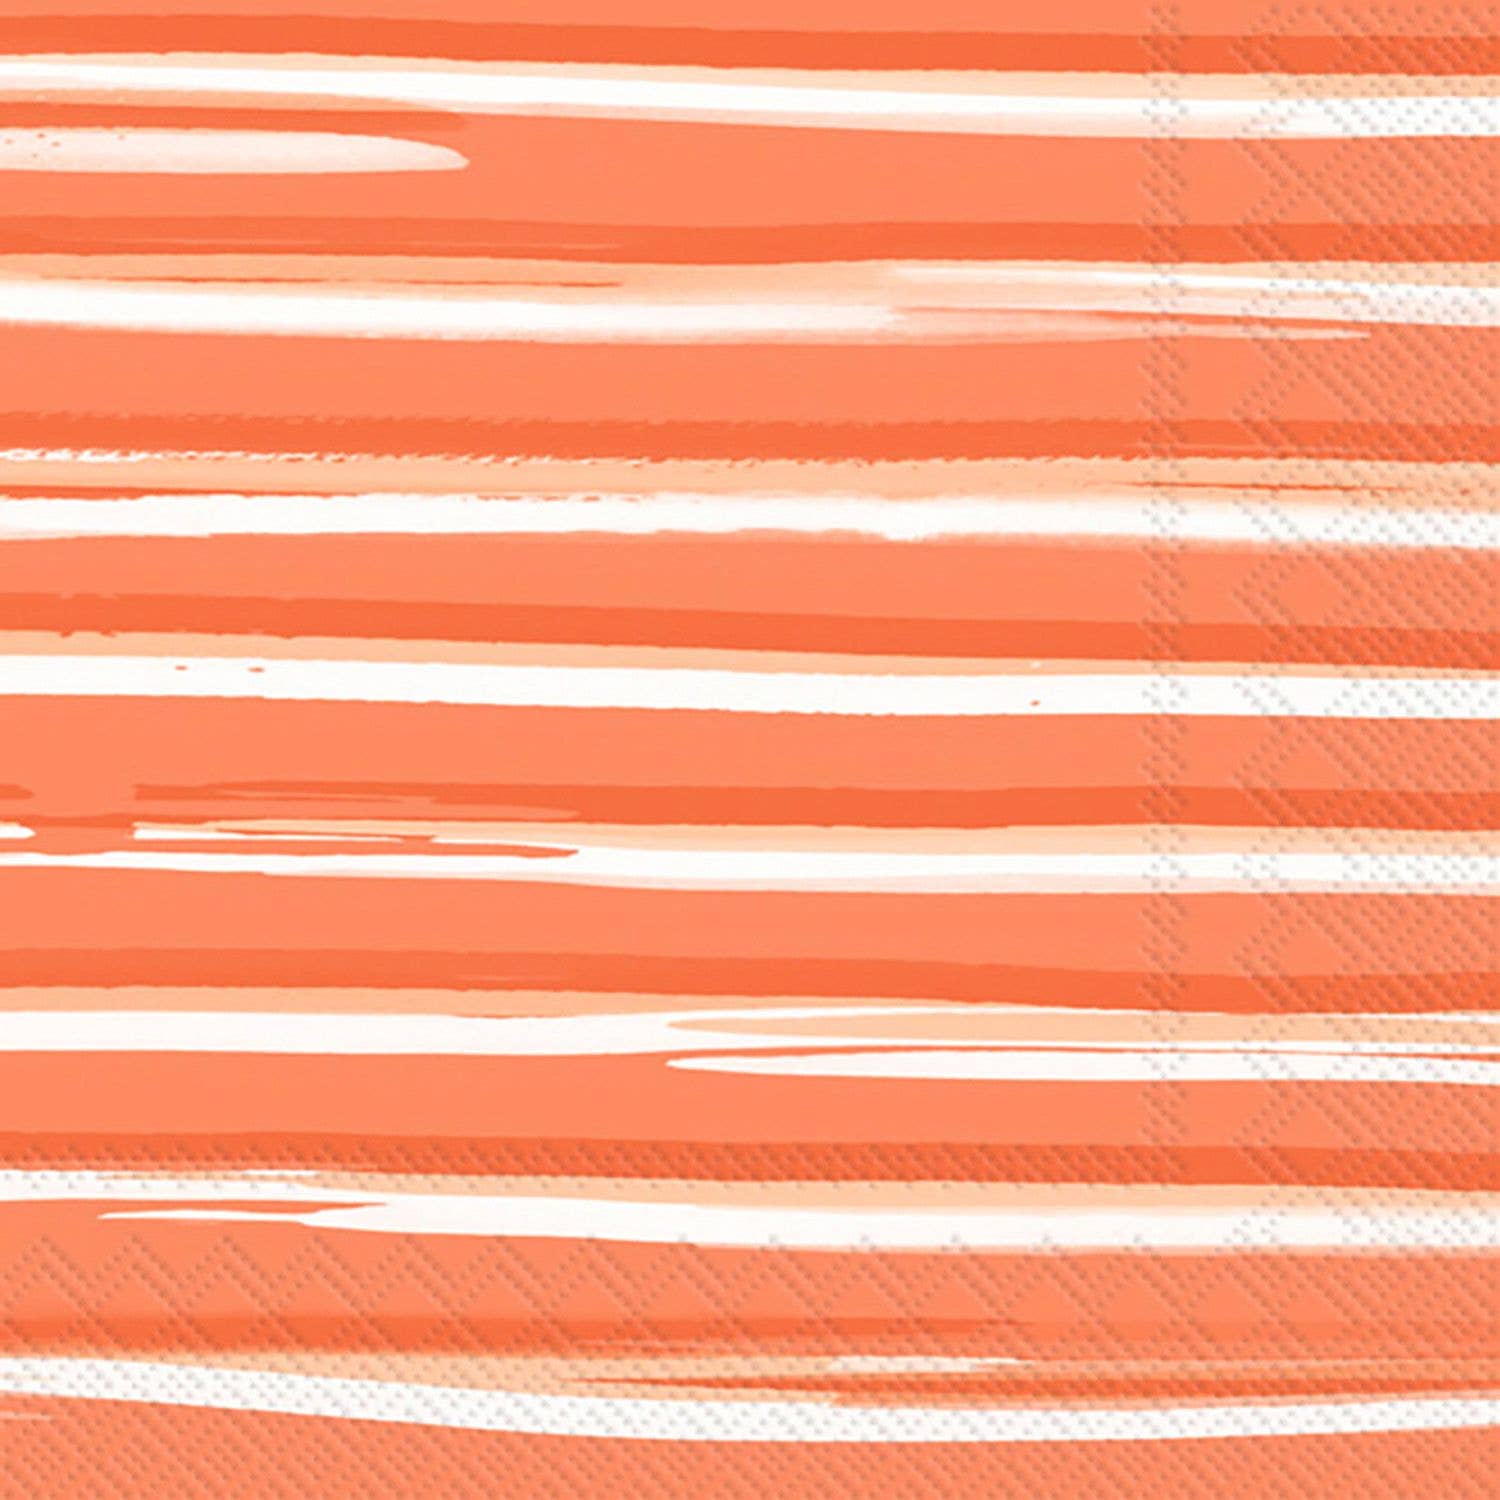 Boston International - Paper Cocktail Napkins Pack of 20 Quito coral - Fenwick & OliverBoston International - Paper Cocktail Napkins Pack of 20 Quito coralBoston InternationalFenwick & OliverC912602